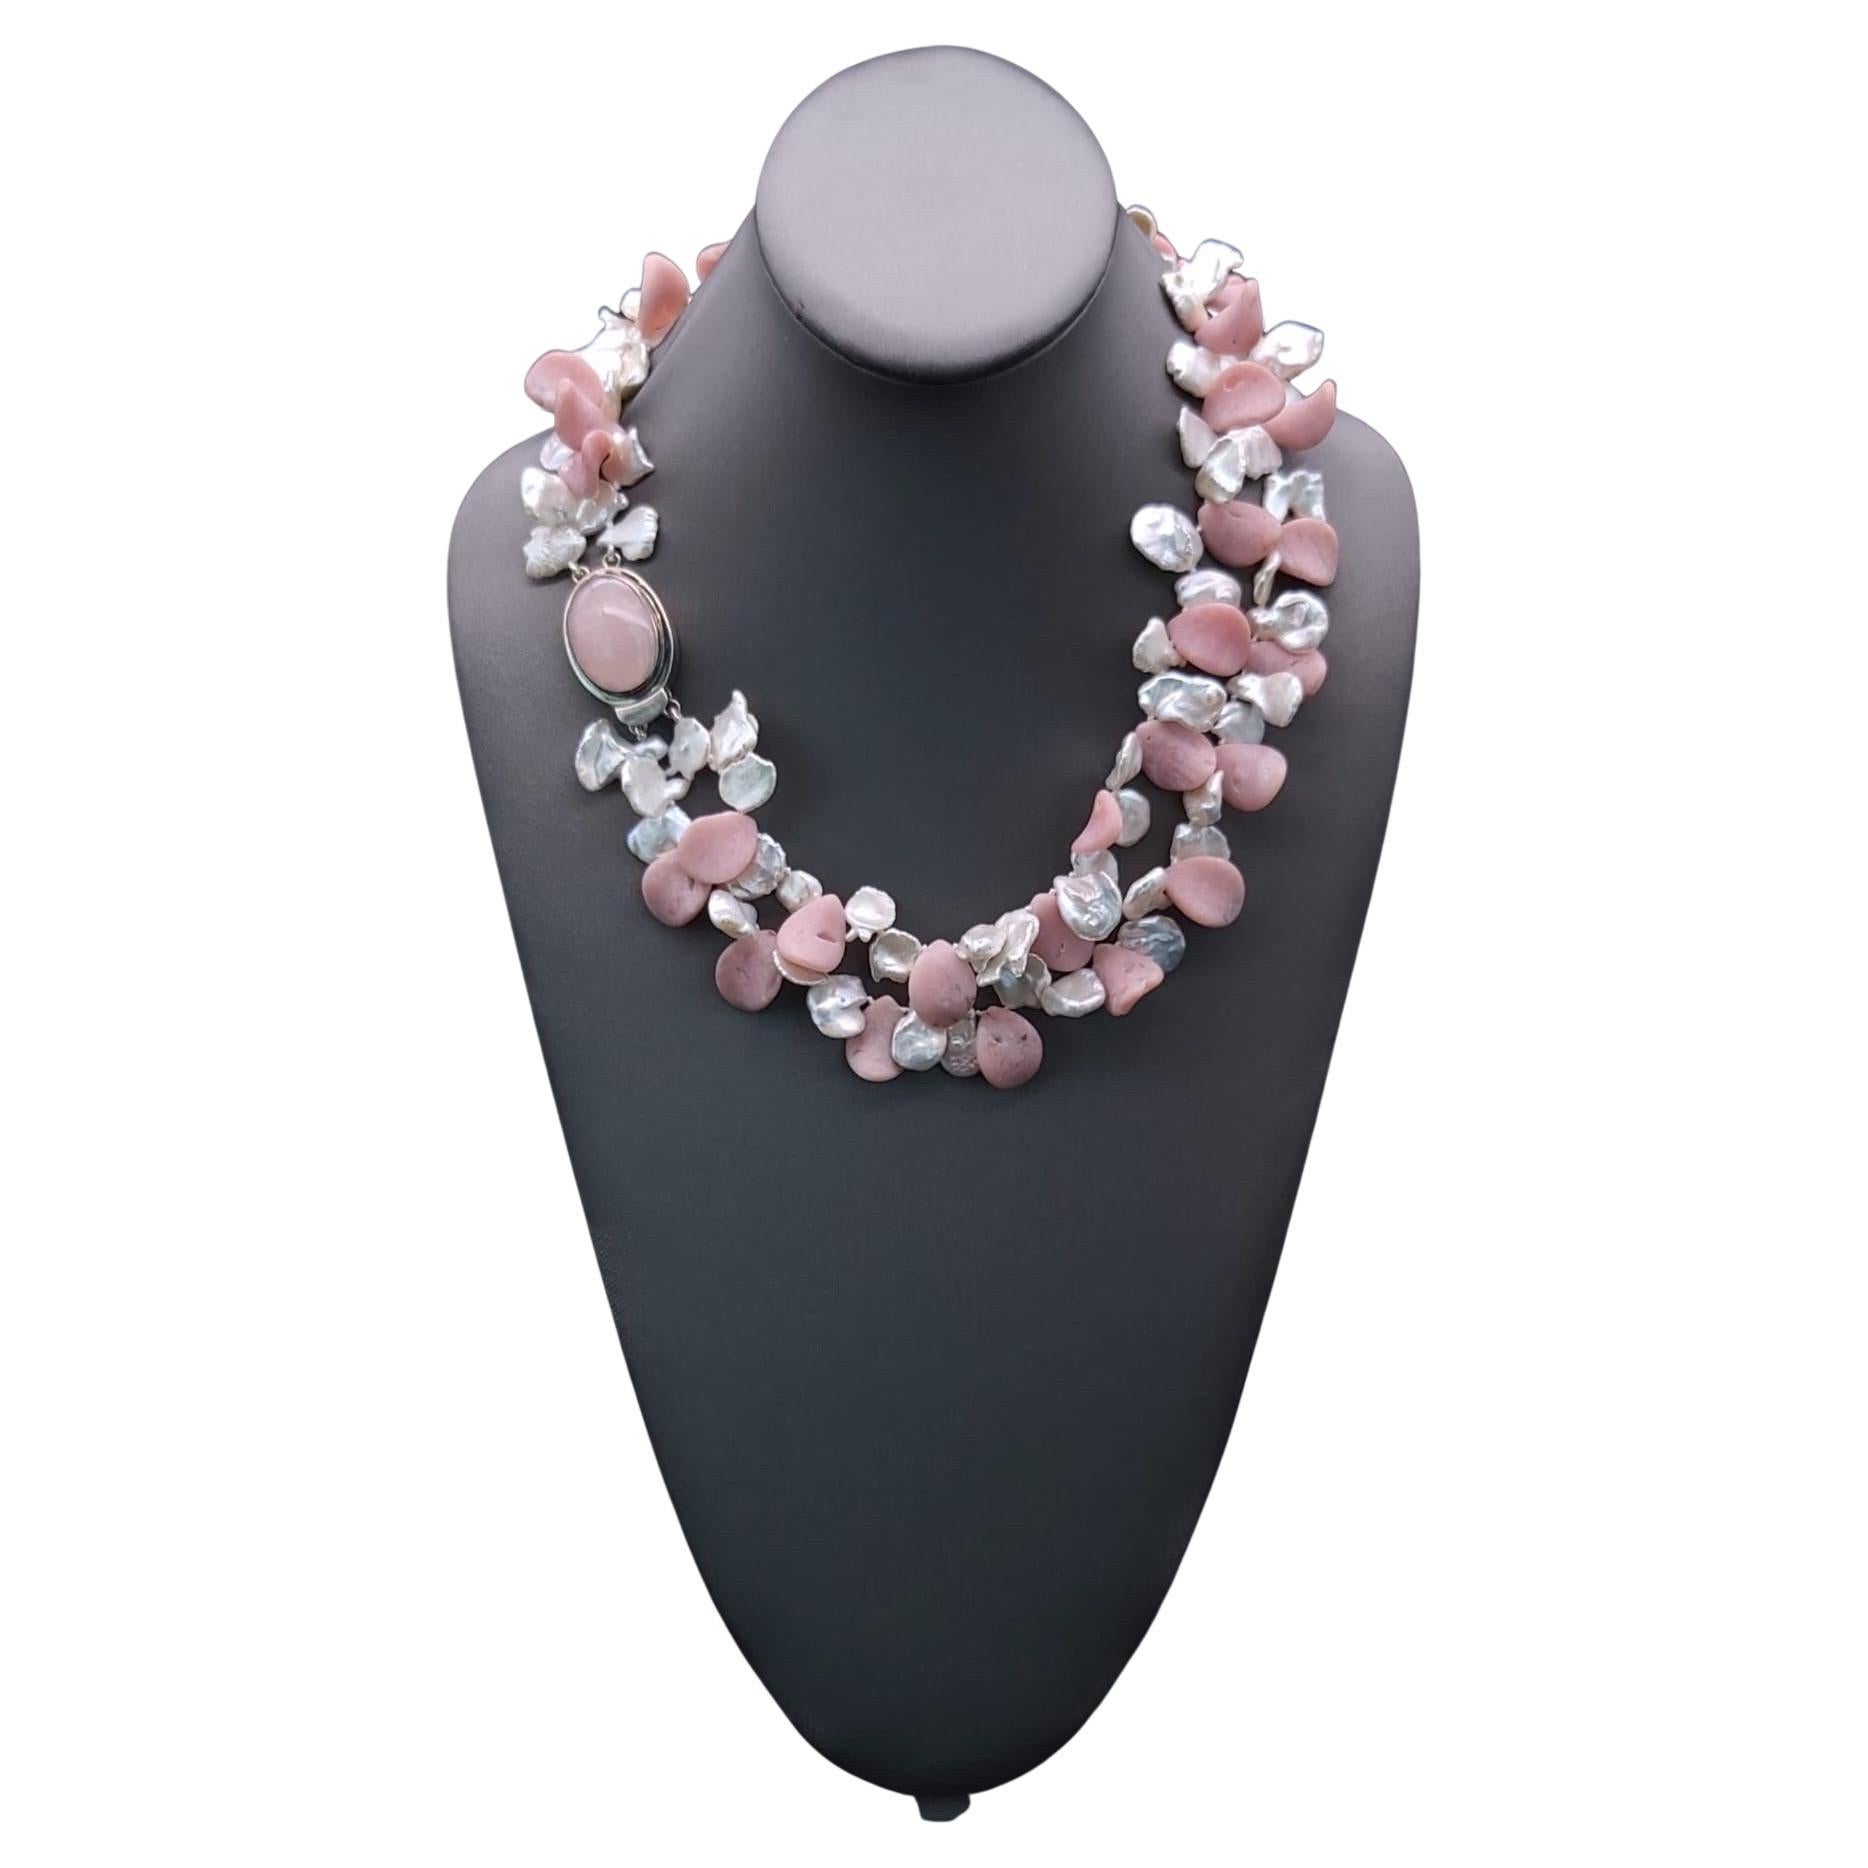 A.Jeschel 2 strand Pink Opal and Pearl necklace.